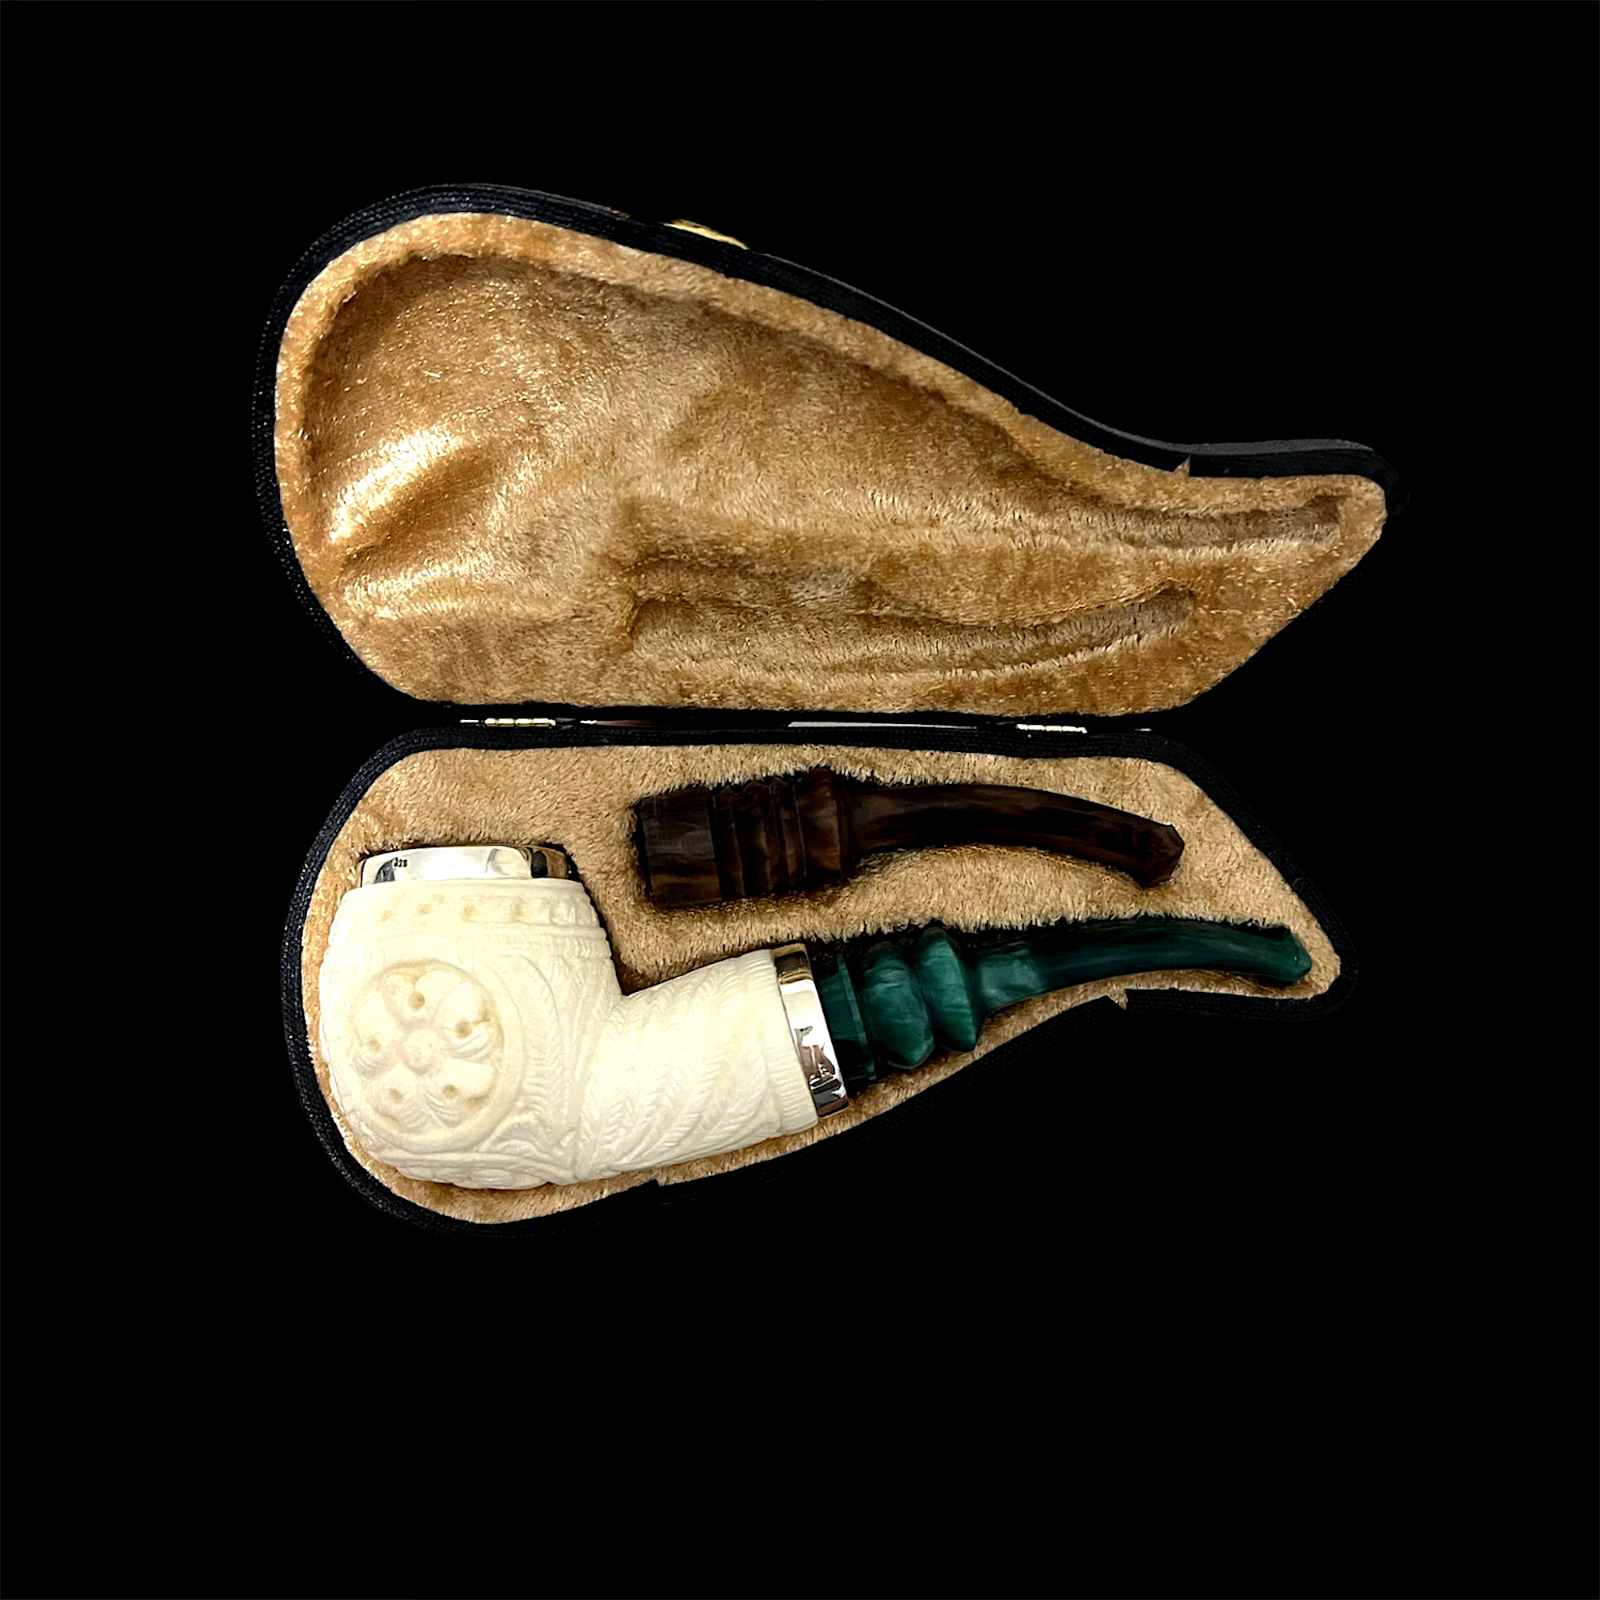 Block Meerschaum Pipe 925 silver unsmoked smoking tobacco pipe w case MD-383